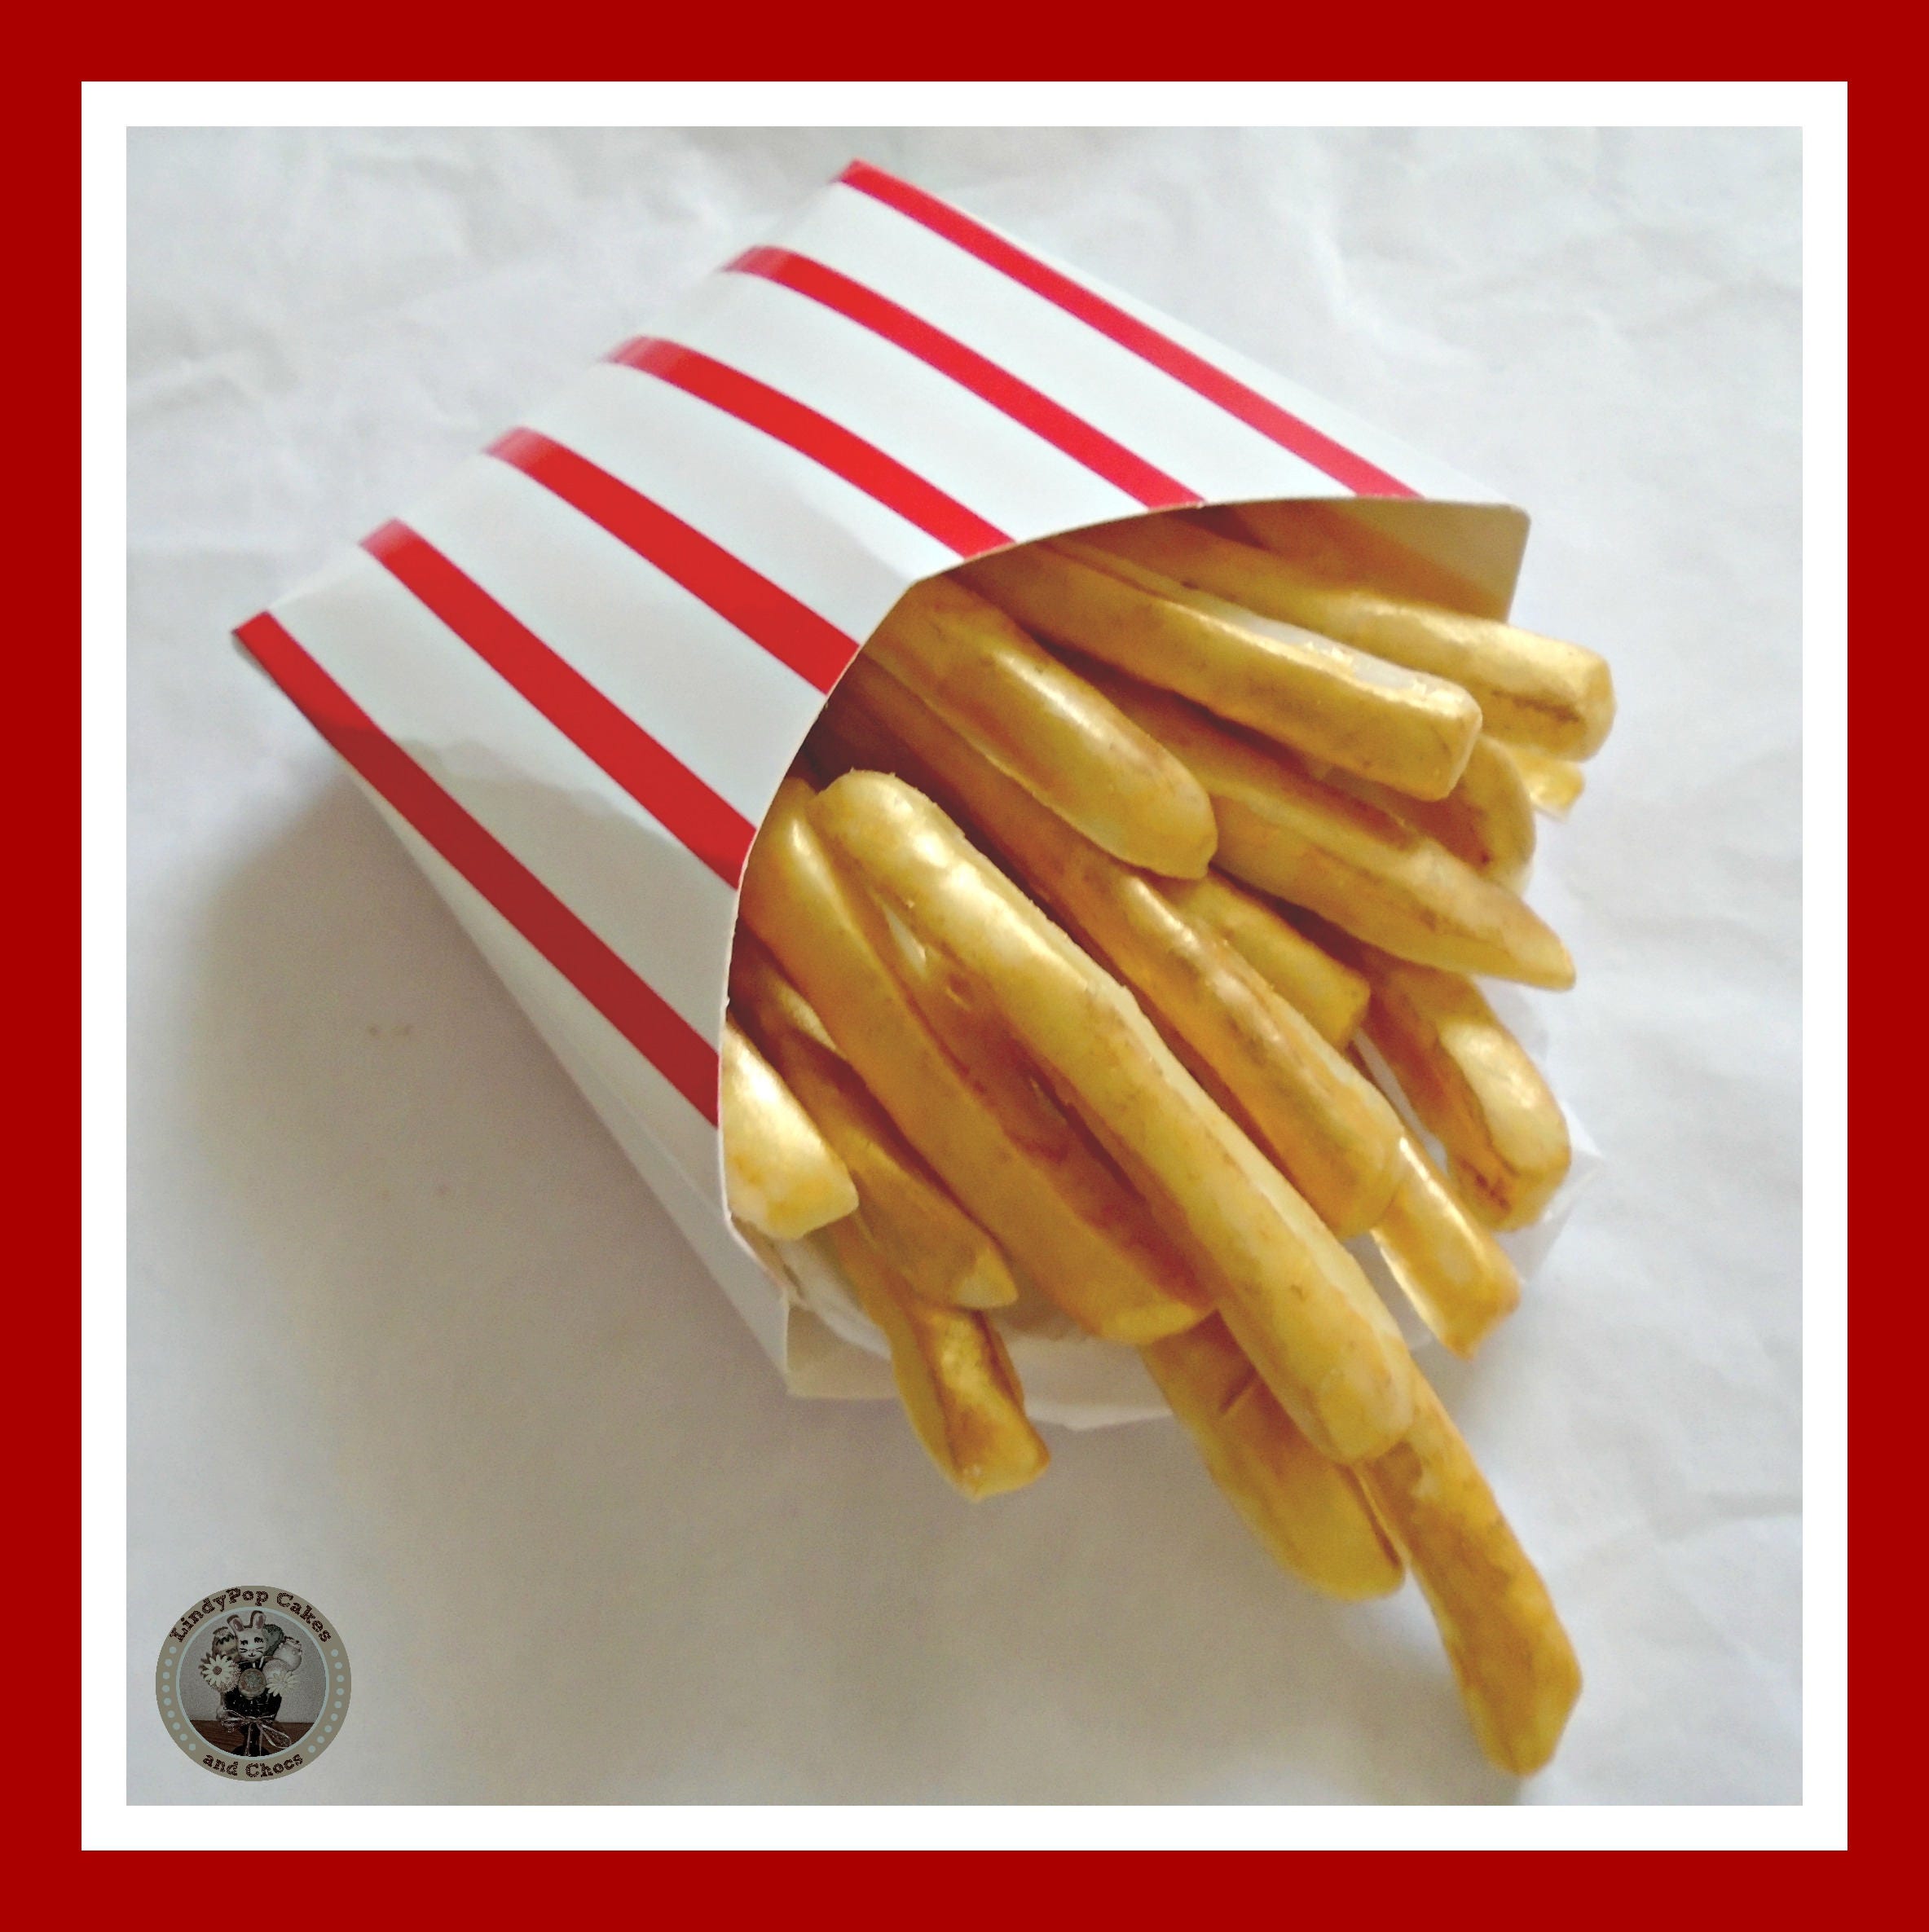 Save on Giant French Fried Potatoes Crinkle Cut Value Pack Order